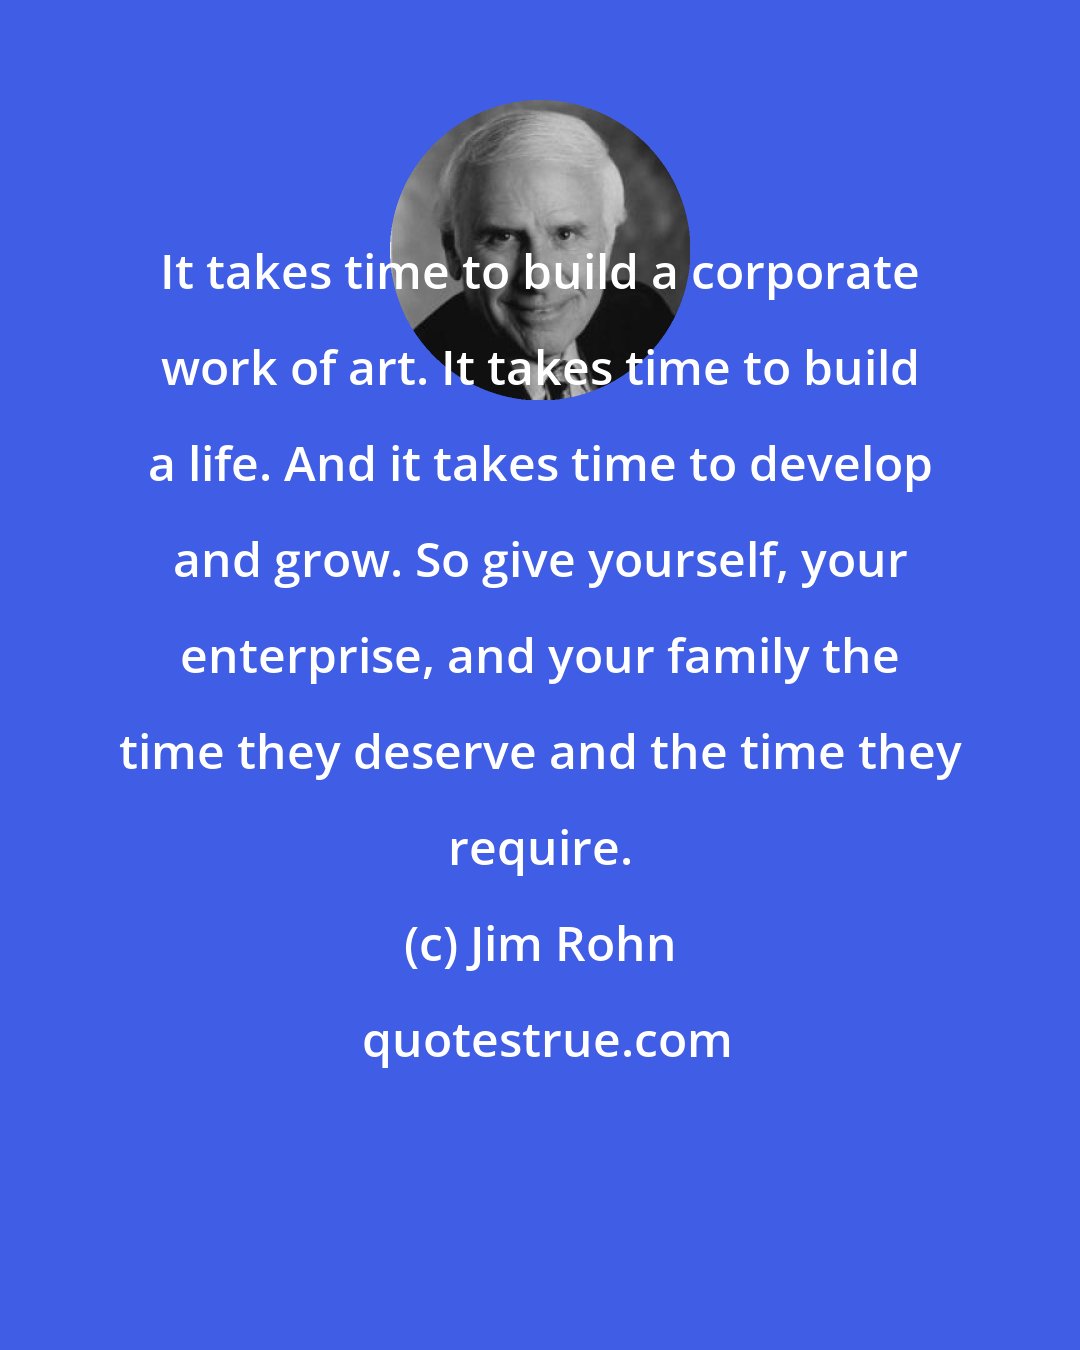 Jim Rohn: It takes time to build a corporate work of art. It takes time to build a life. And it takes time to develop and grow. So give yourself, your enterprise, and your family the time they deserve and the time they require.